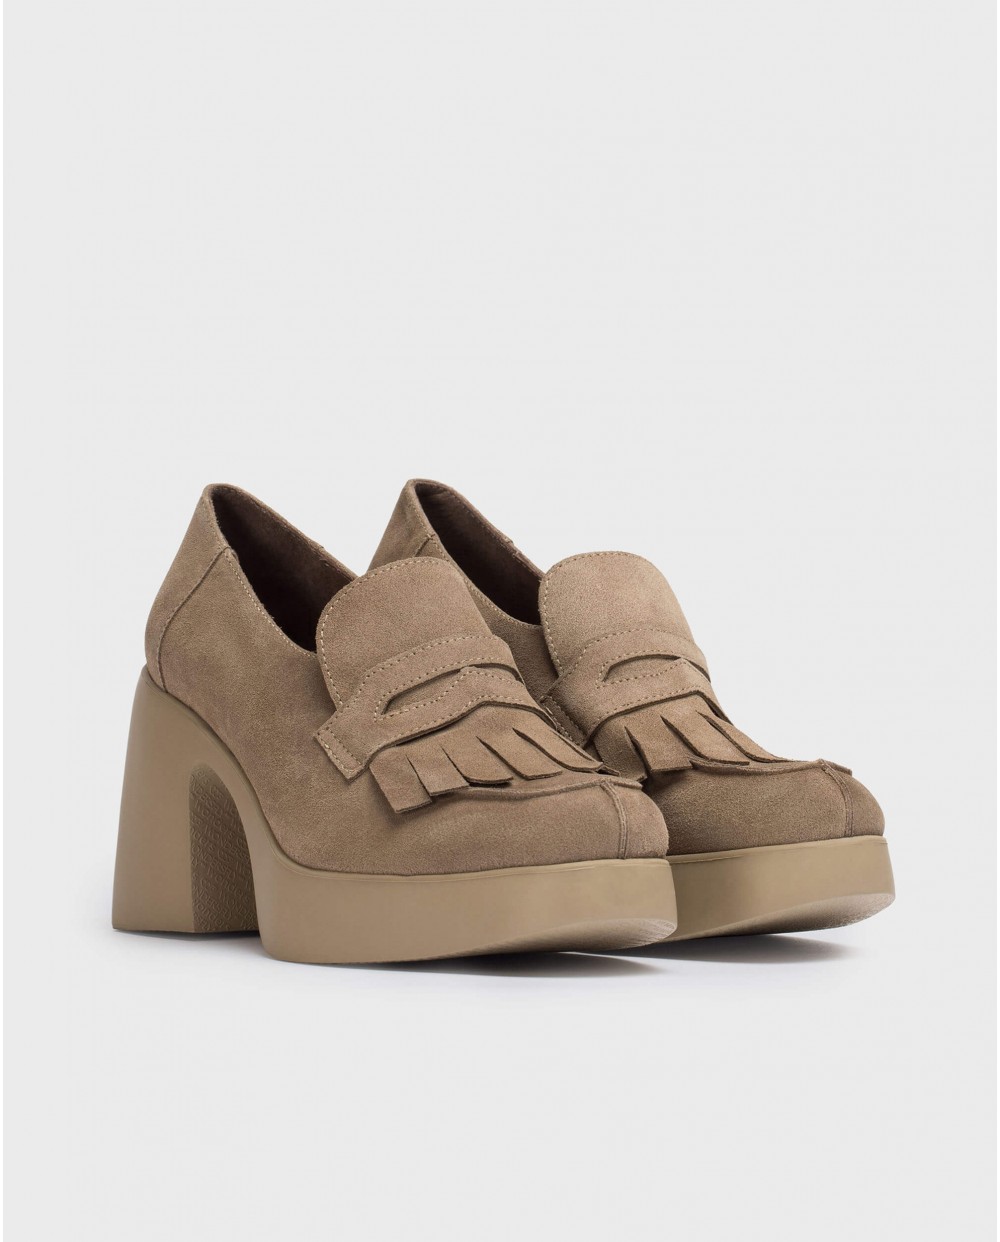 Wonders-Wedges-Taupe Buzz Suede Mary Jane